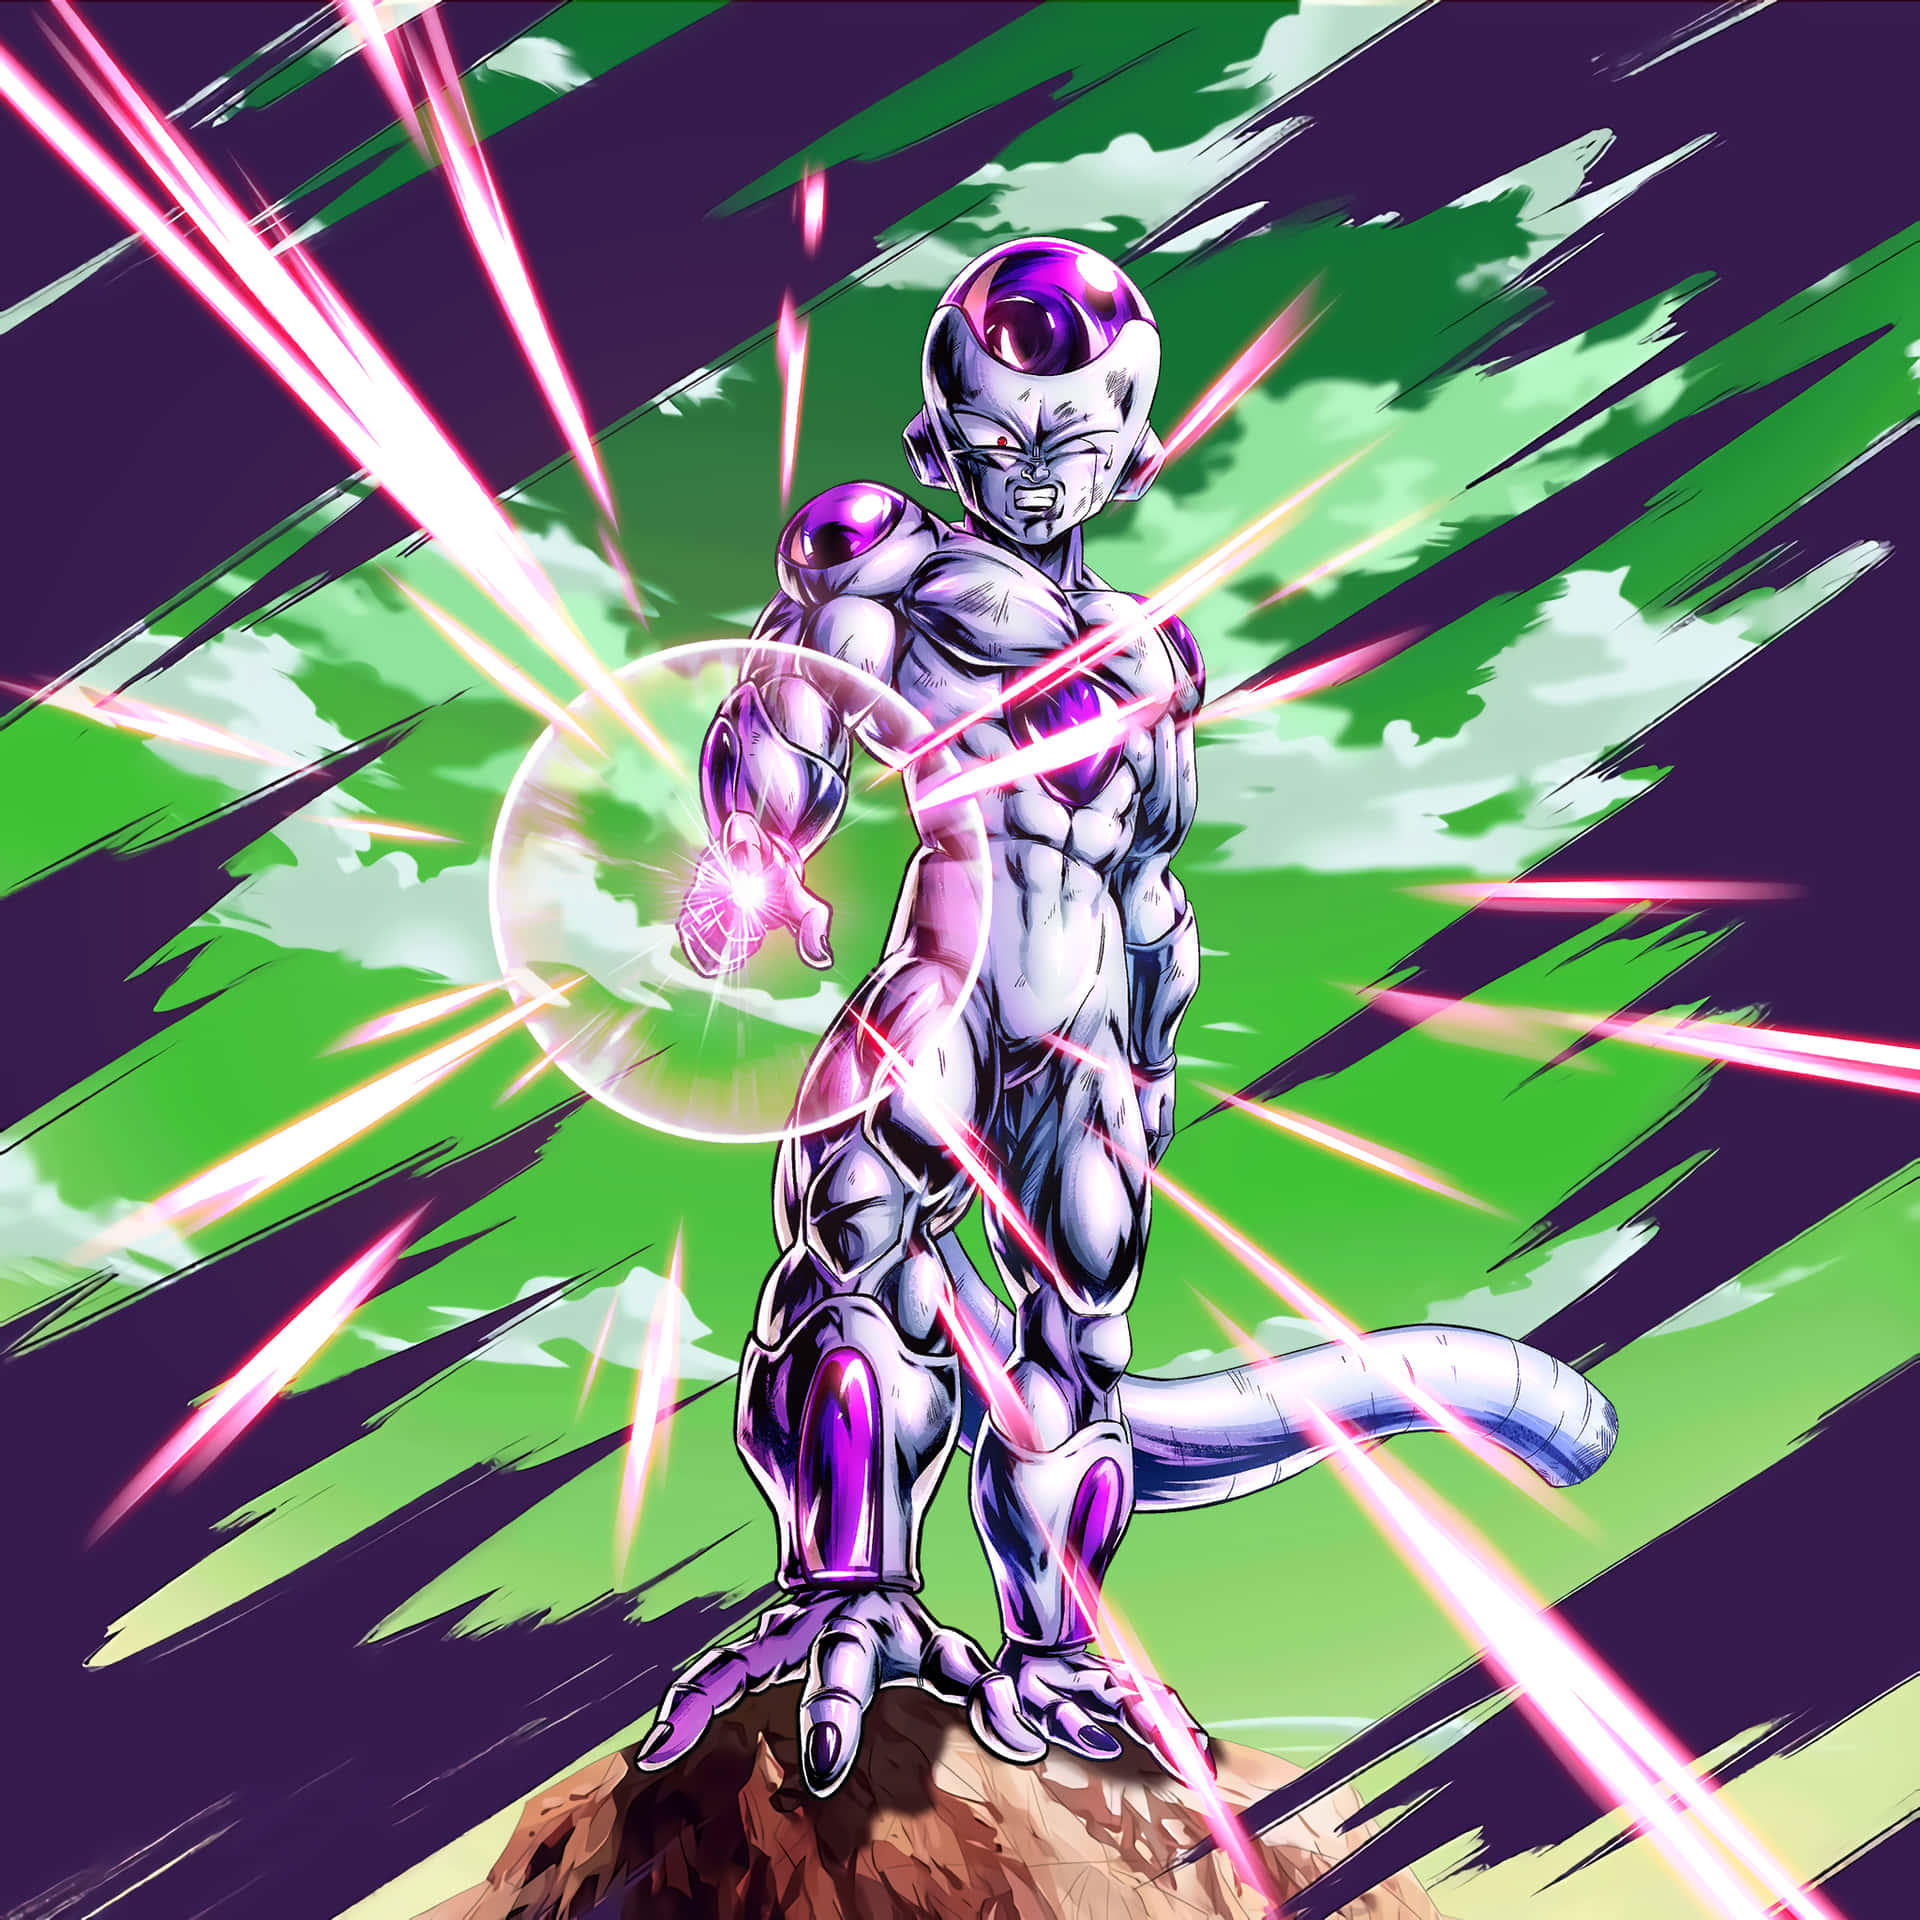 Fight Against Frieza To Resist The Evil Forces. Wallpaper